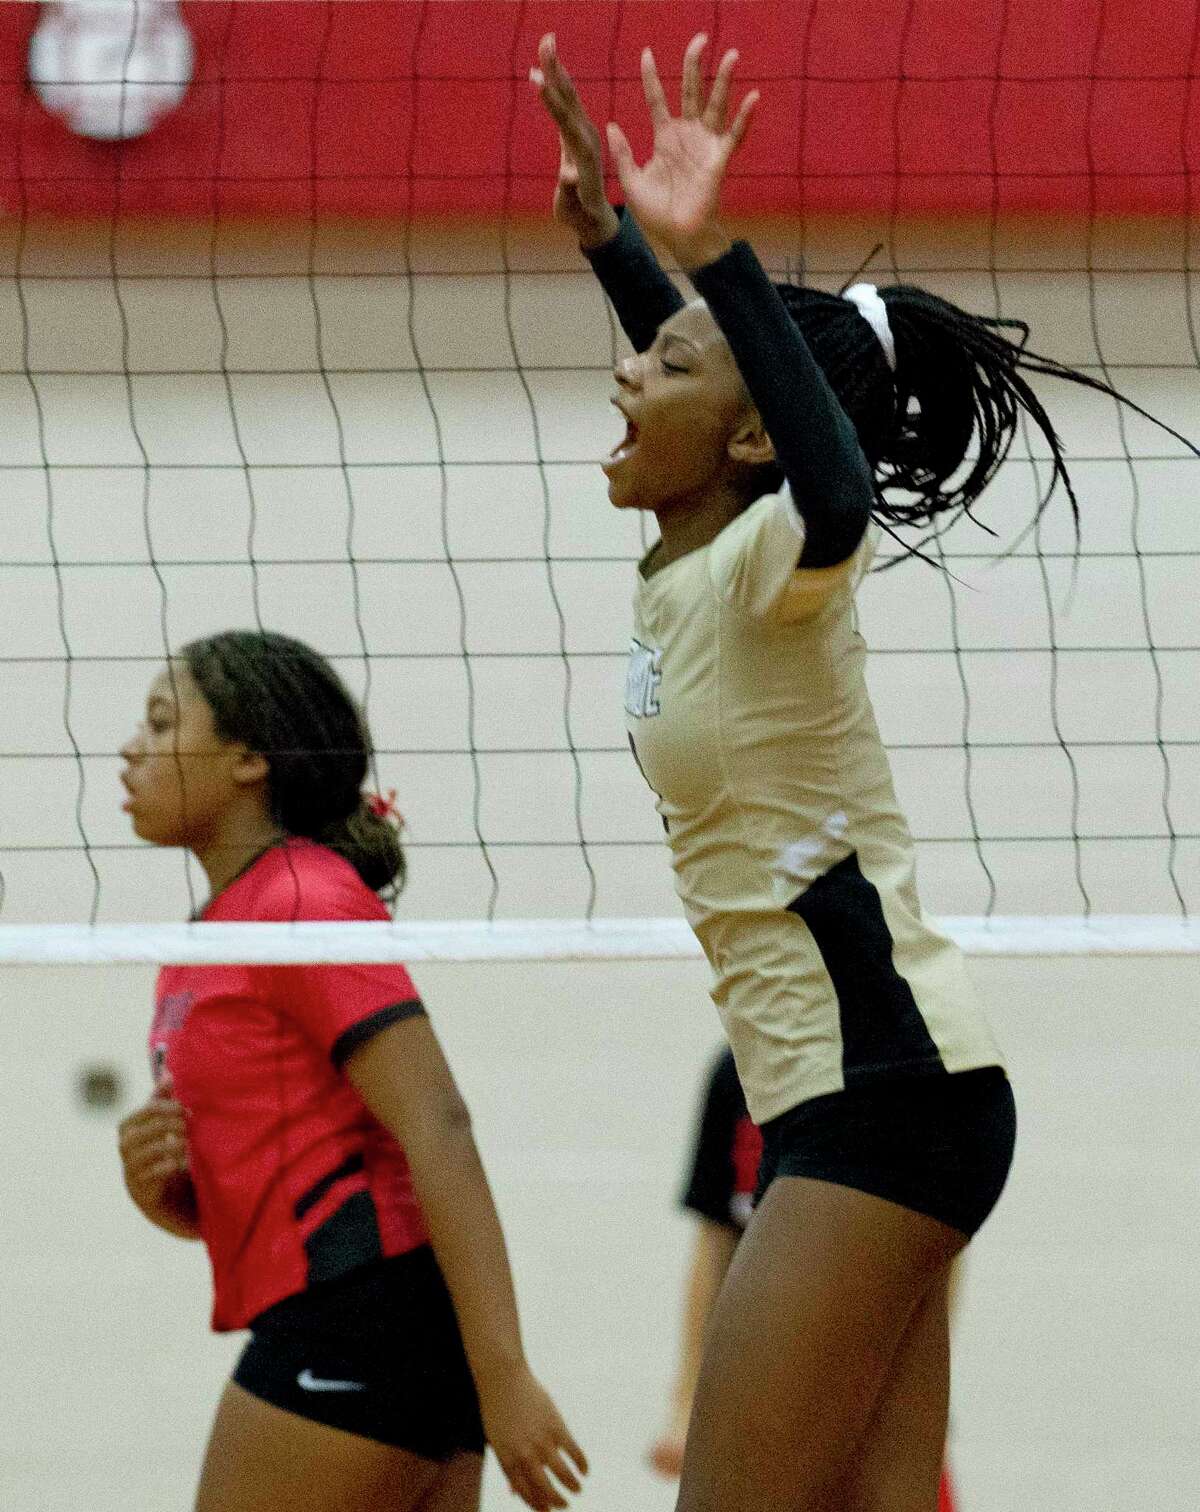 Conroe middle blocker Mikayla Anderson (2) reacts after a block during the first set of a District 15-6A high school volleyball match at Oak Ridge High School, Friday, Sept. 27, 2019, in Oak Ridge.